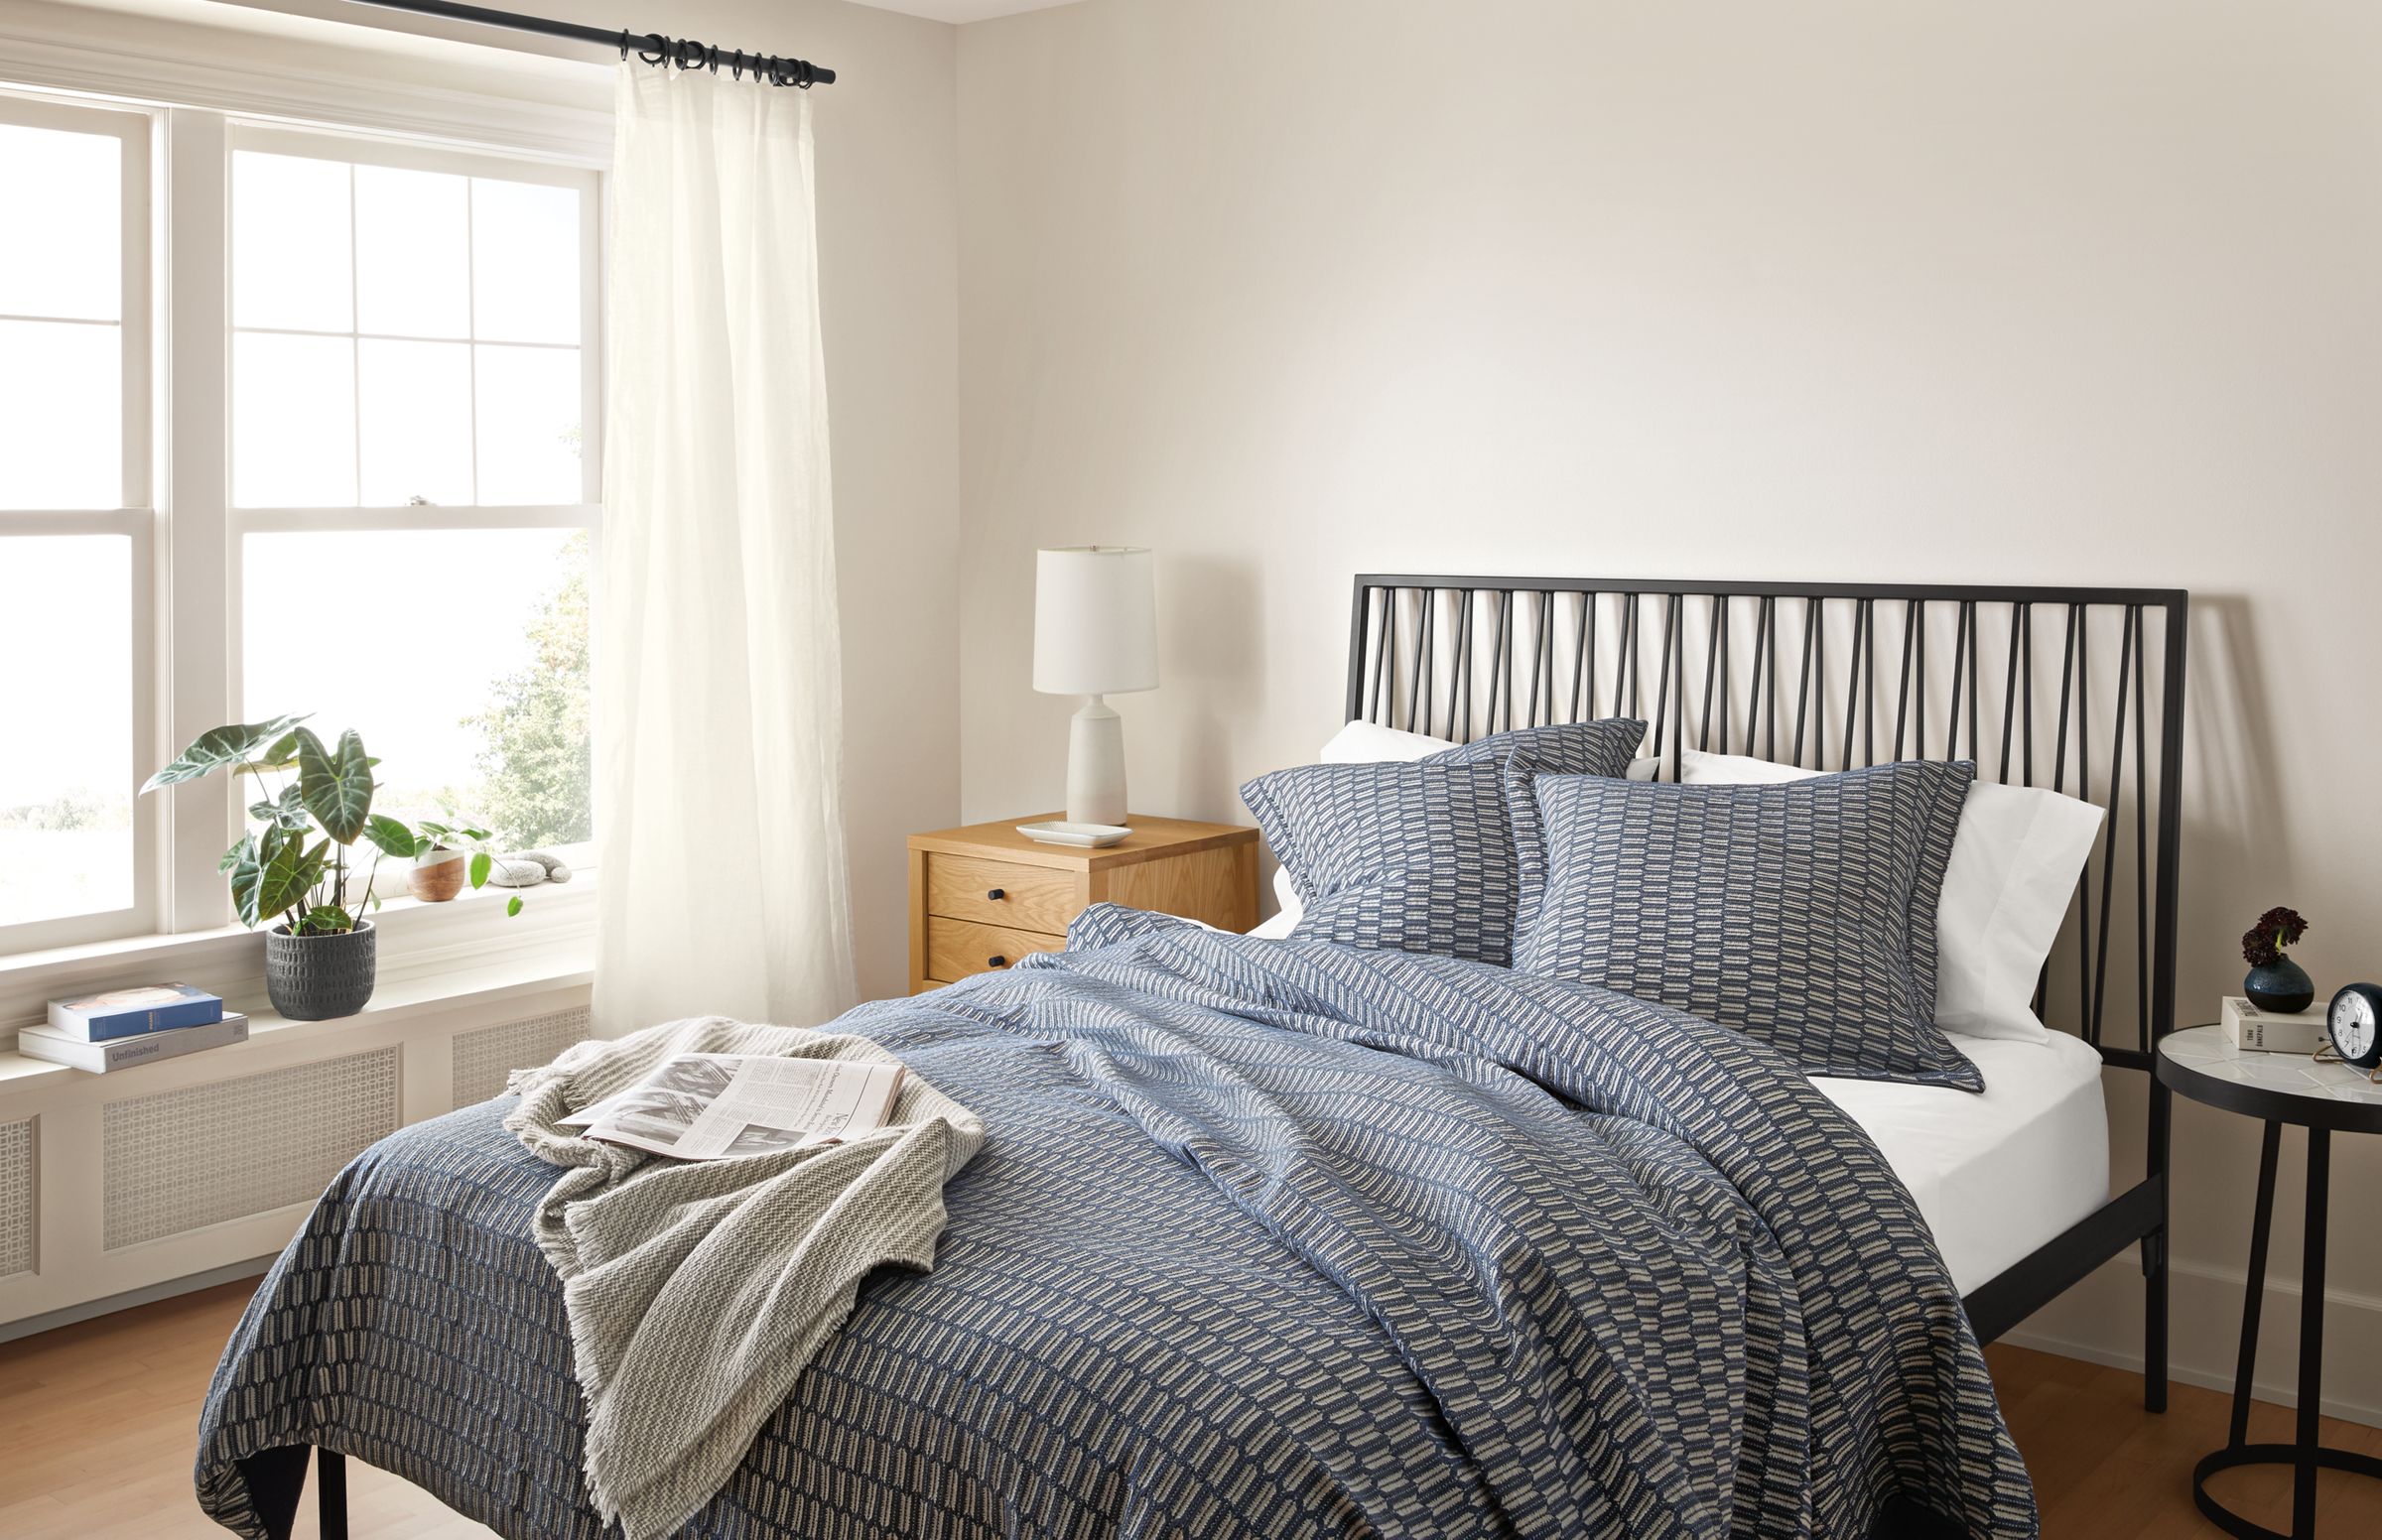 Bedding image with Sheffield duvet in marine on Jennings queen bed.